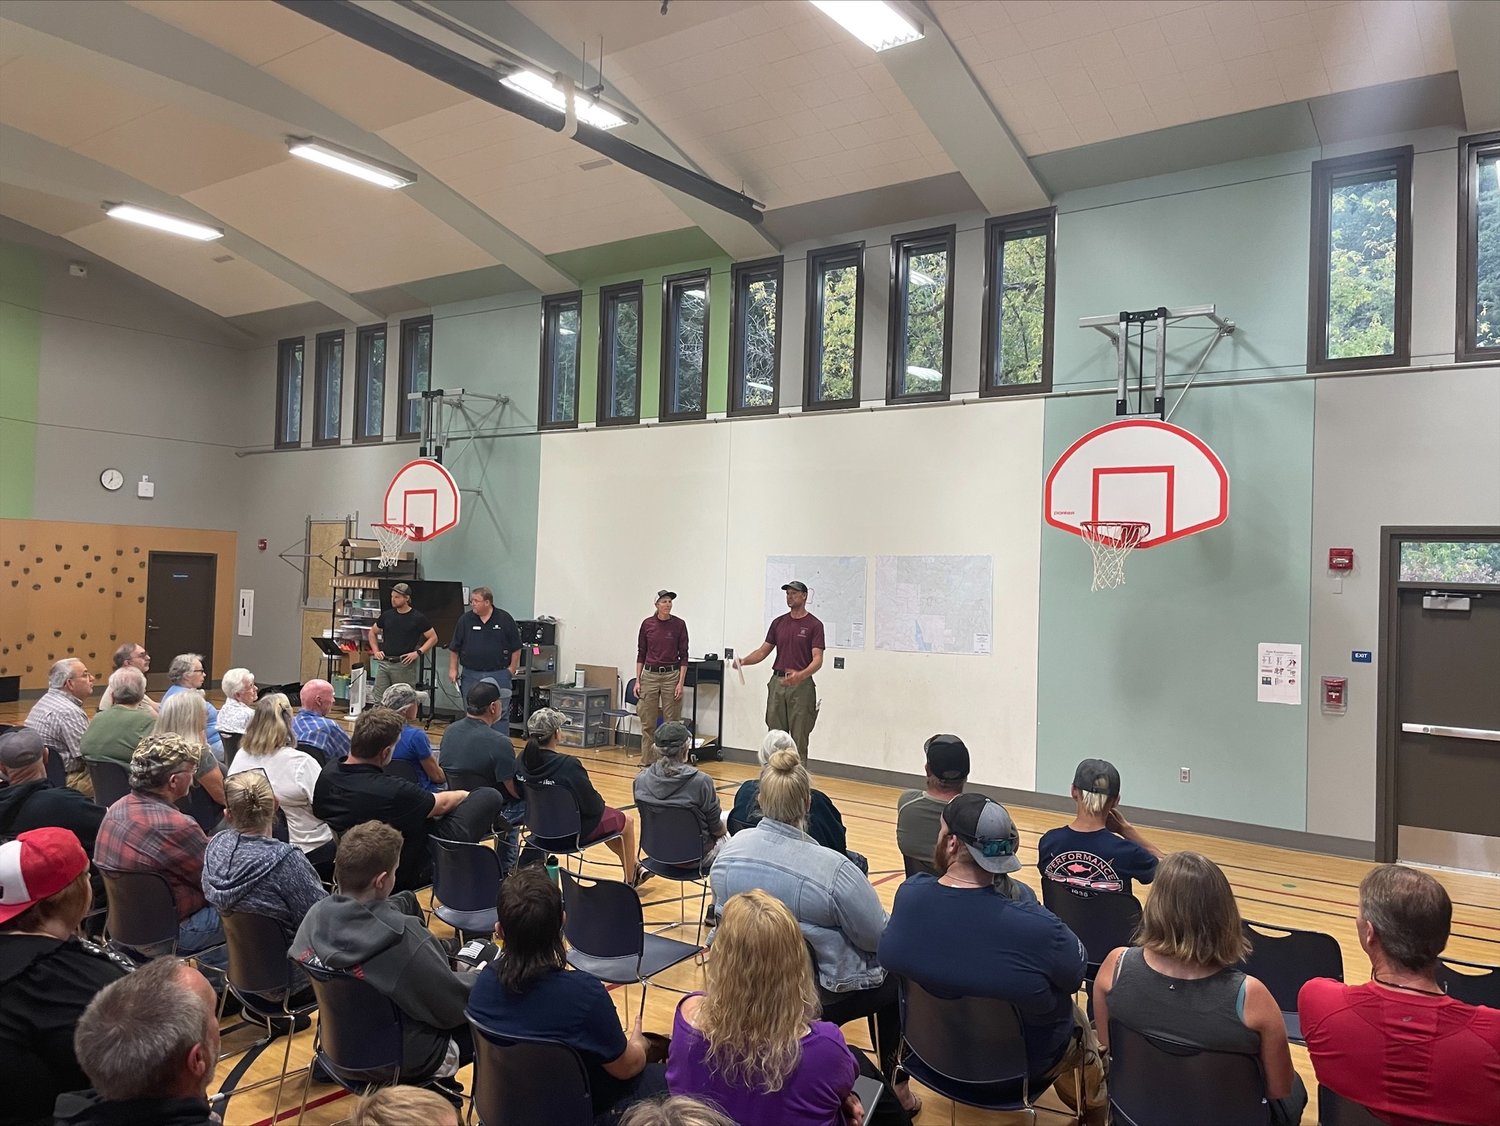 Community members hear from firefighters working the Kalama fire in the Gifford Pinchot National Forest at Yale Elementary School on Sept. 12.